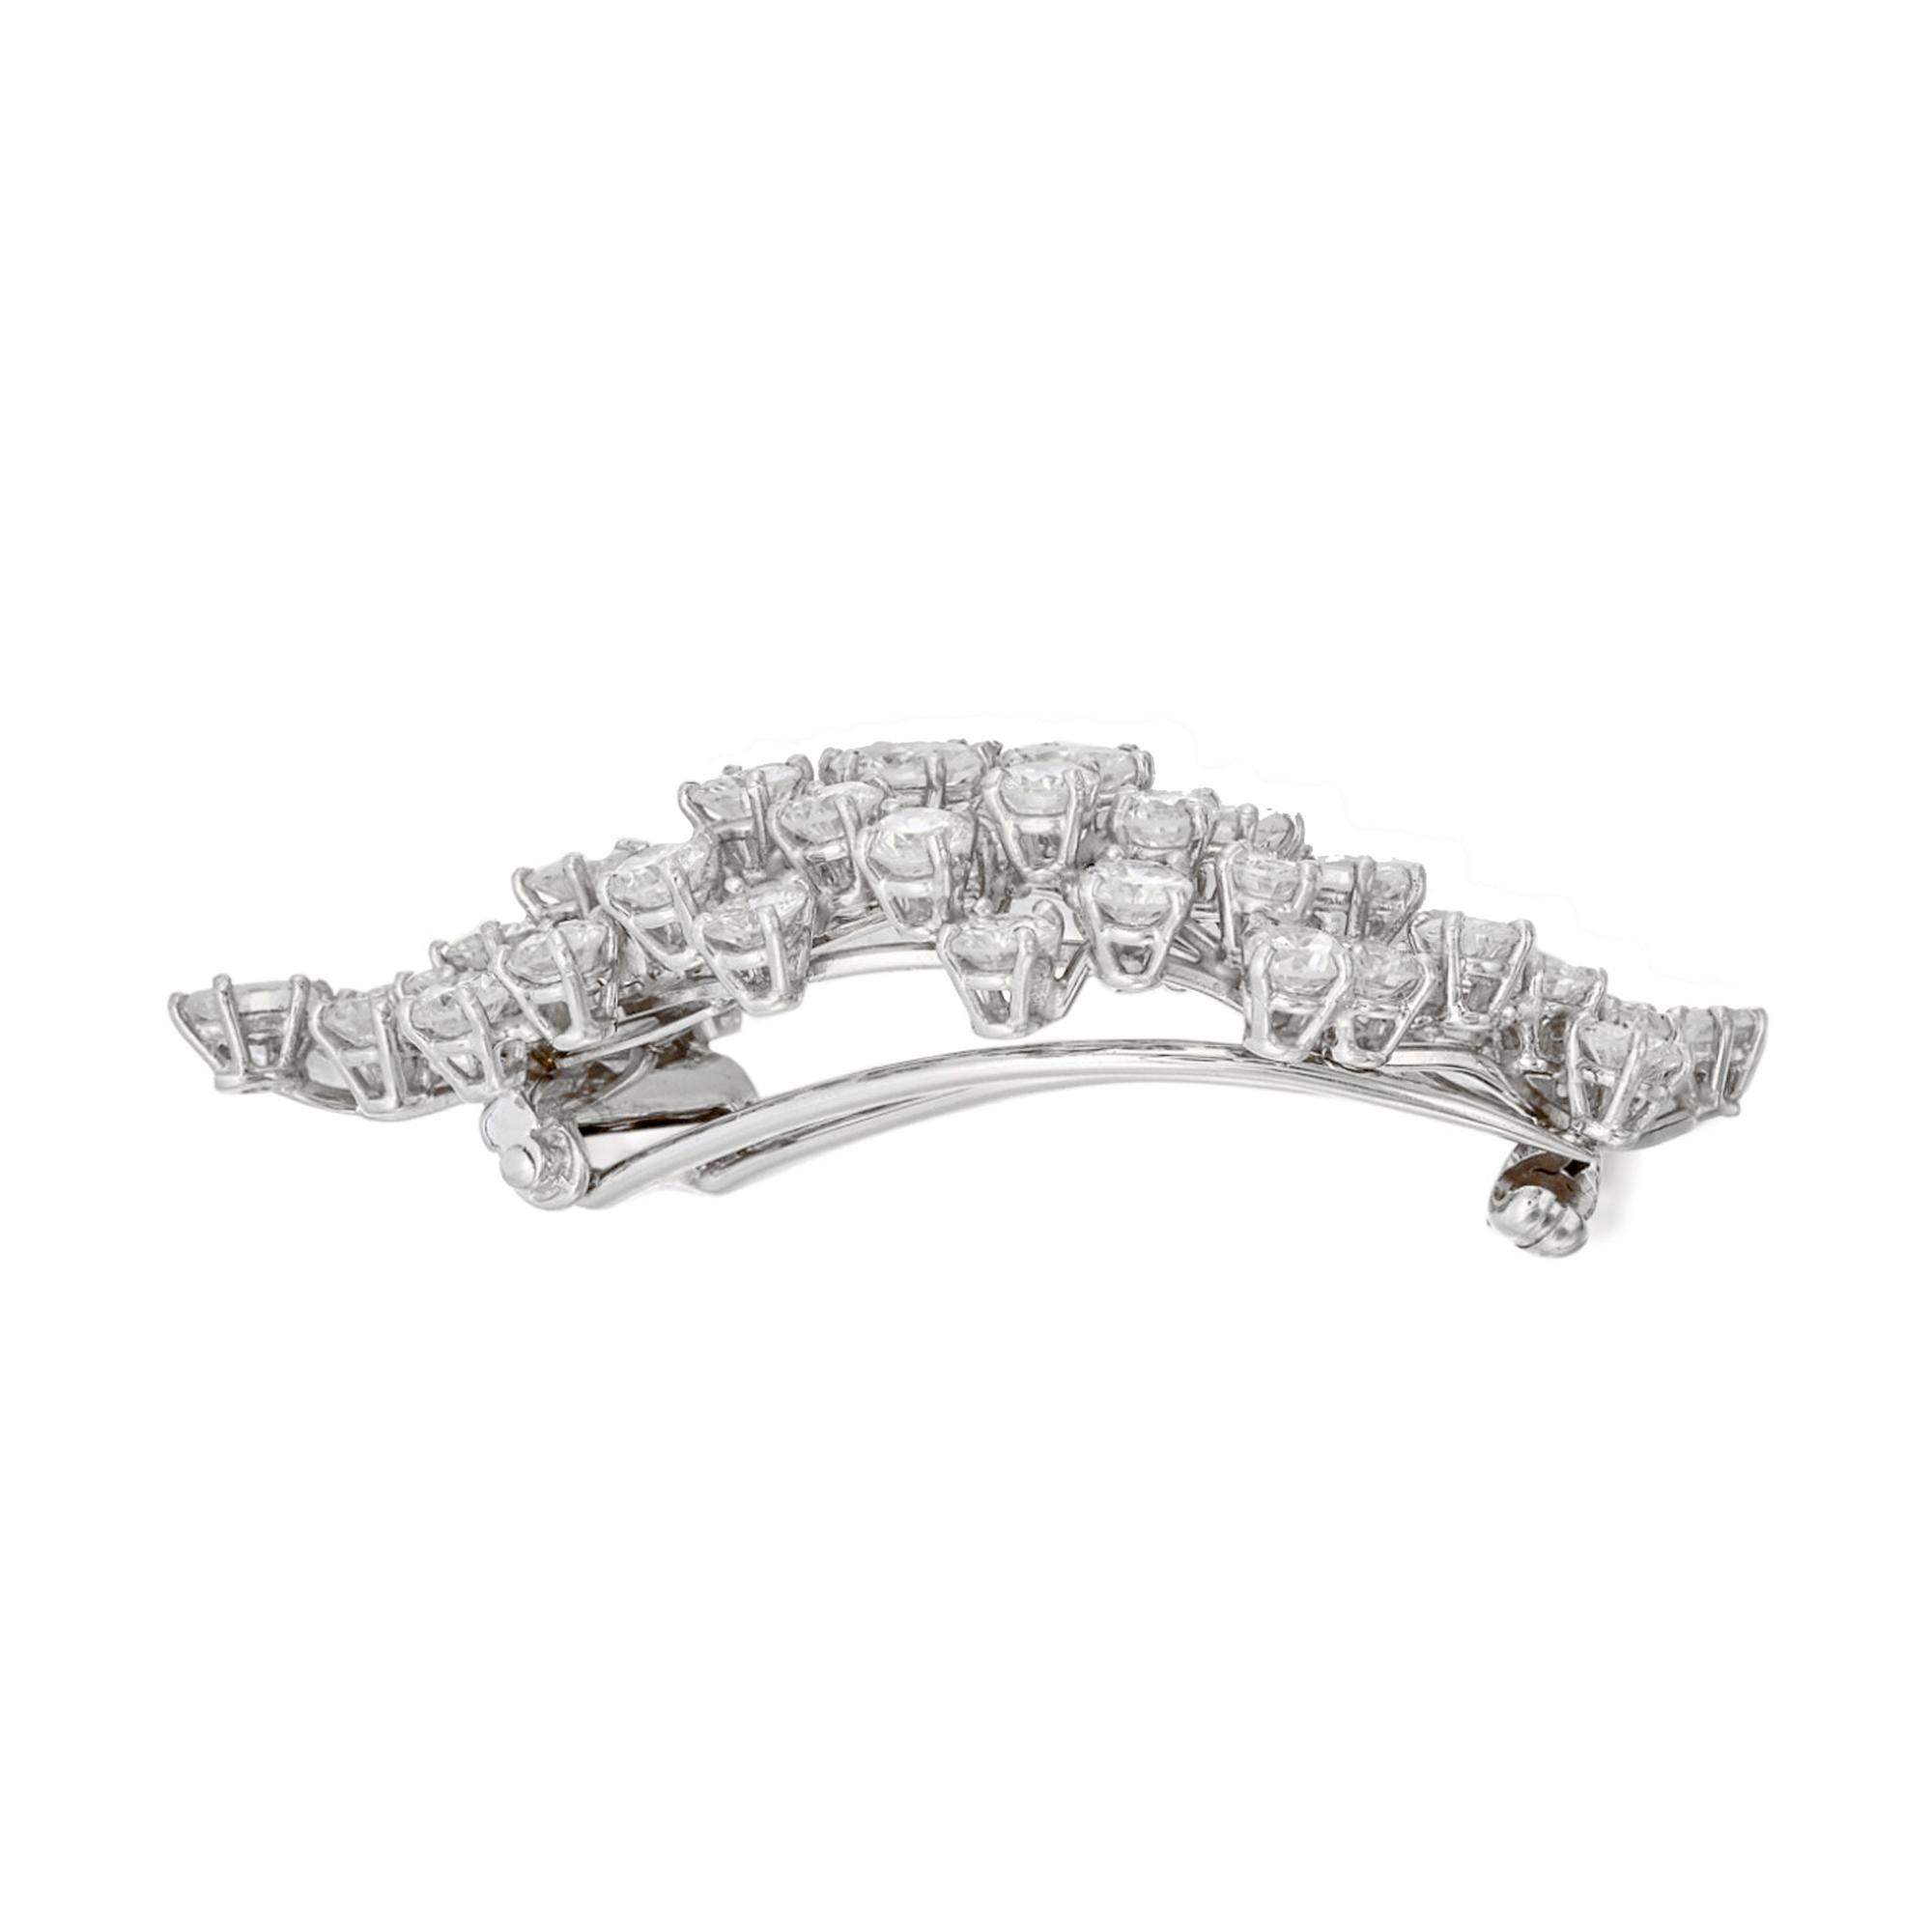 Discover the timeless elegance of the Harry Winston Cluster Vintage Platinum Diamond Brooch, a versatile masterpiece that doubles as a necklace, hailing from the esteemed year of 1975. This exquisite piece encapsulates the unmatched craftsmanship